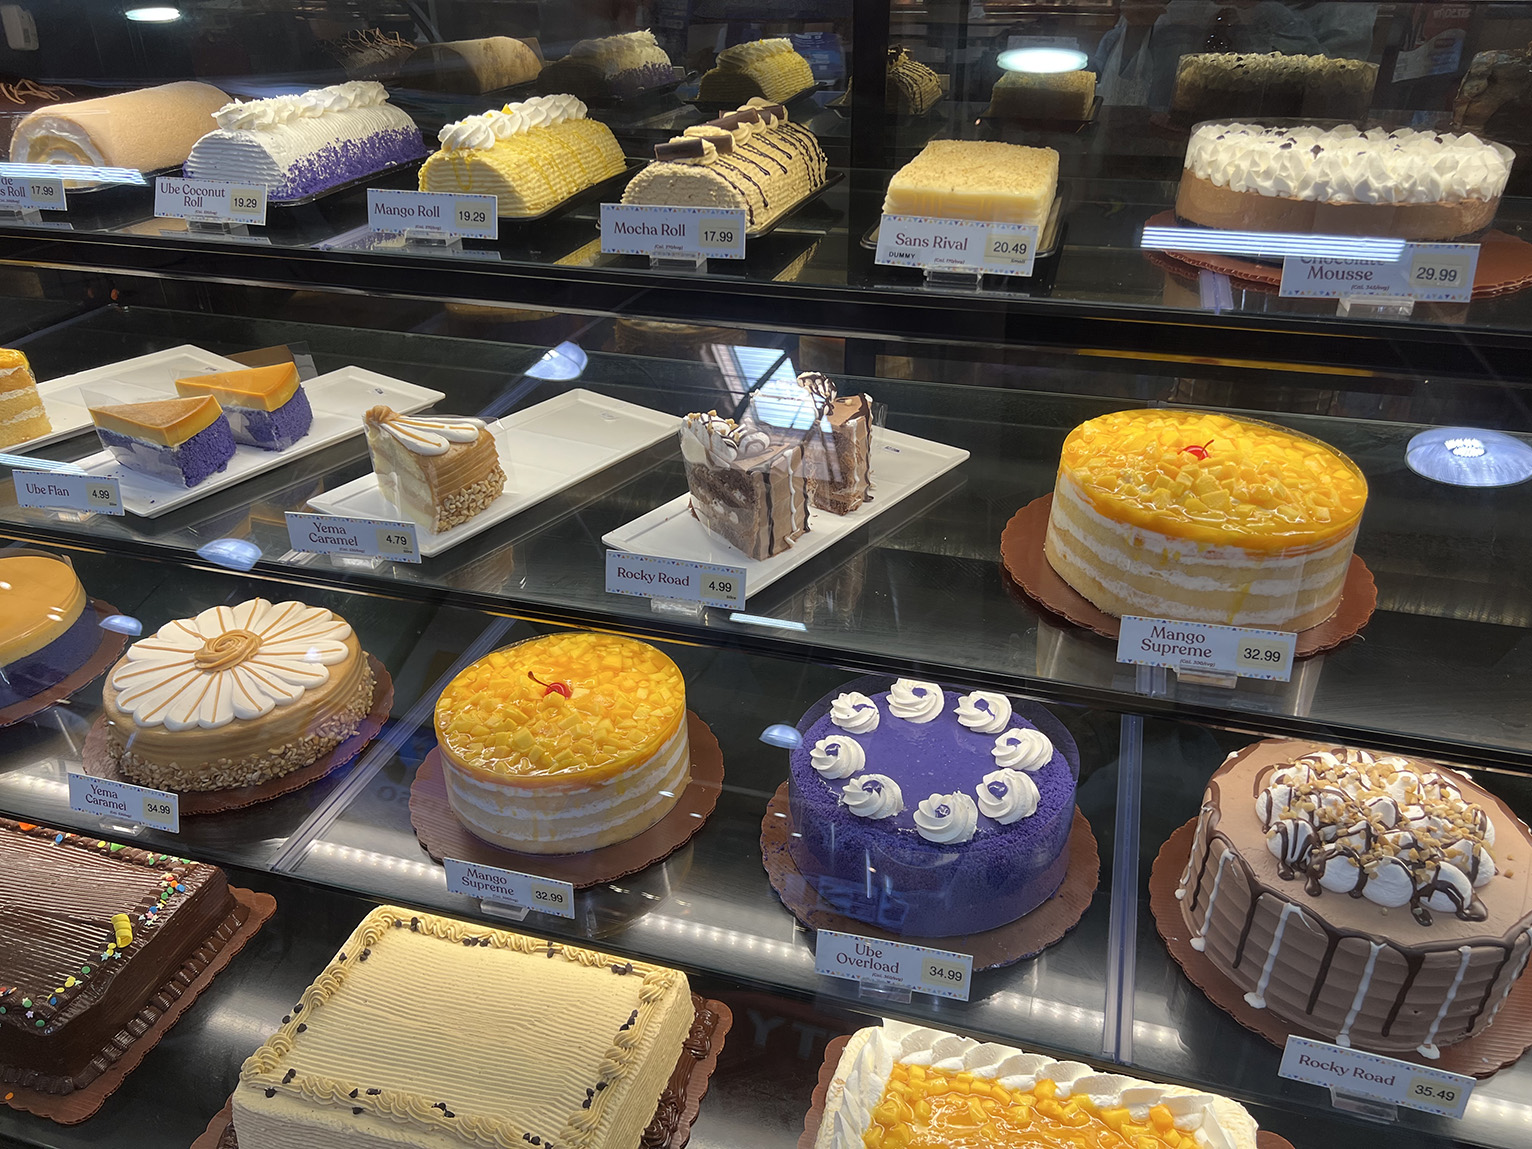 Cakes - Seafood City Supermarket in Irvine, California - Photo by Julie Nguyen